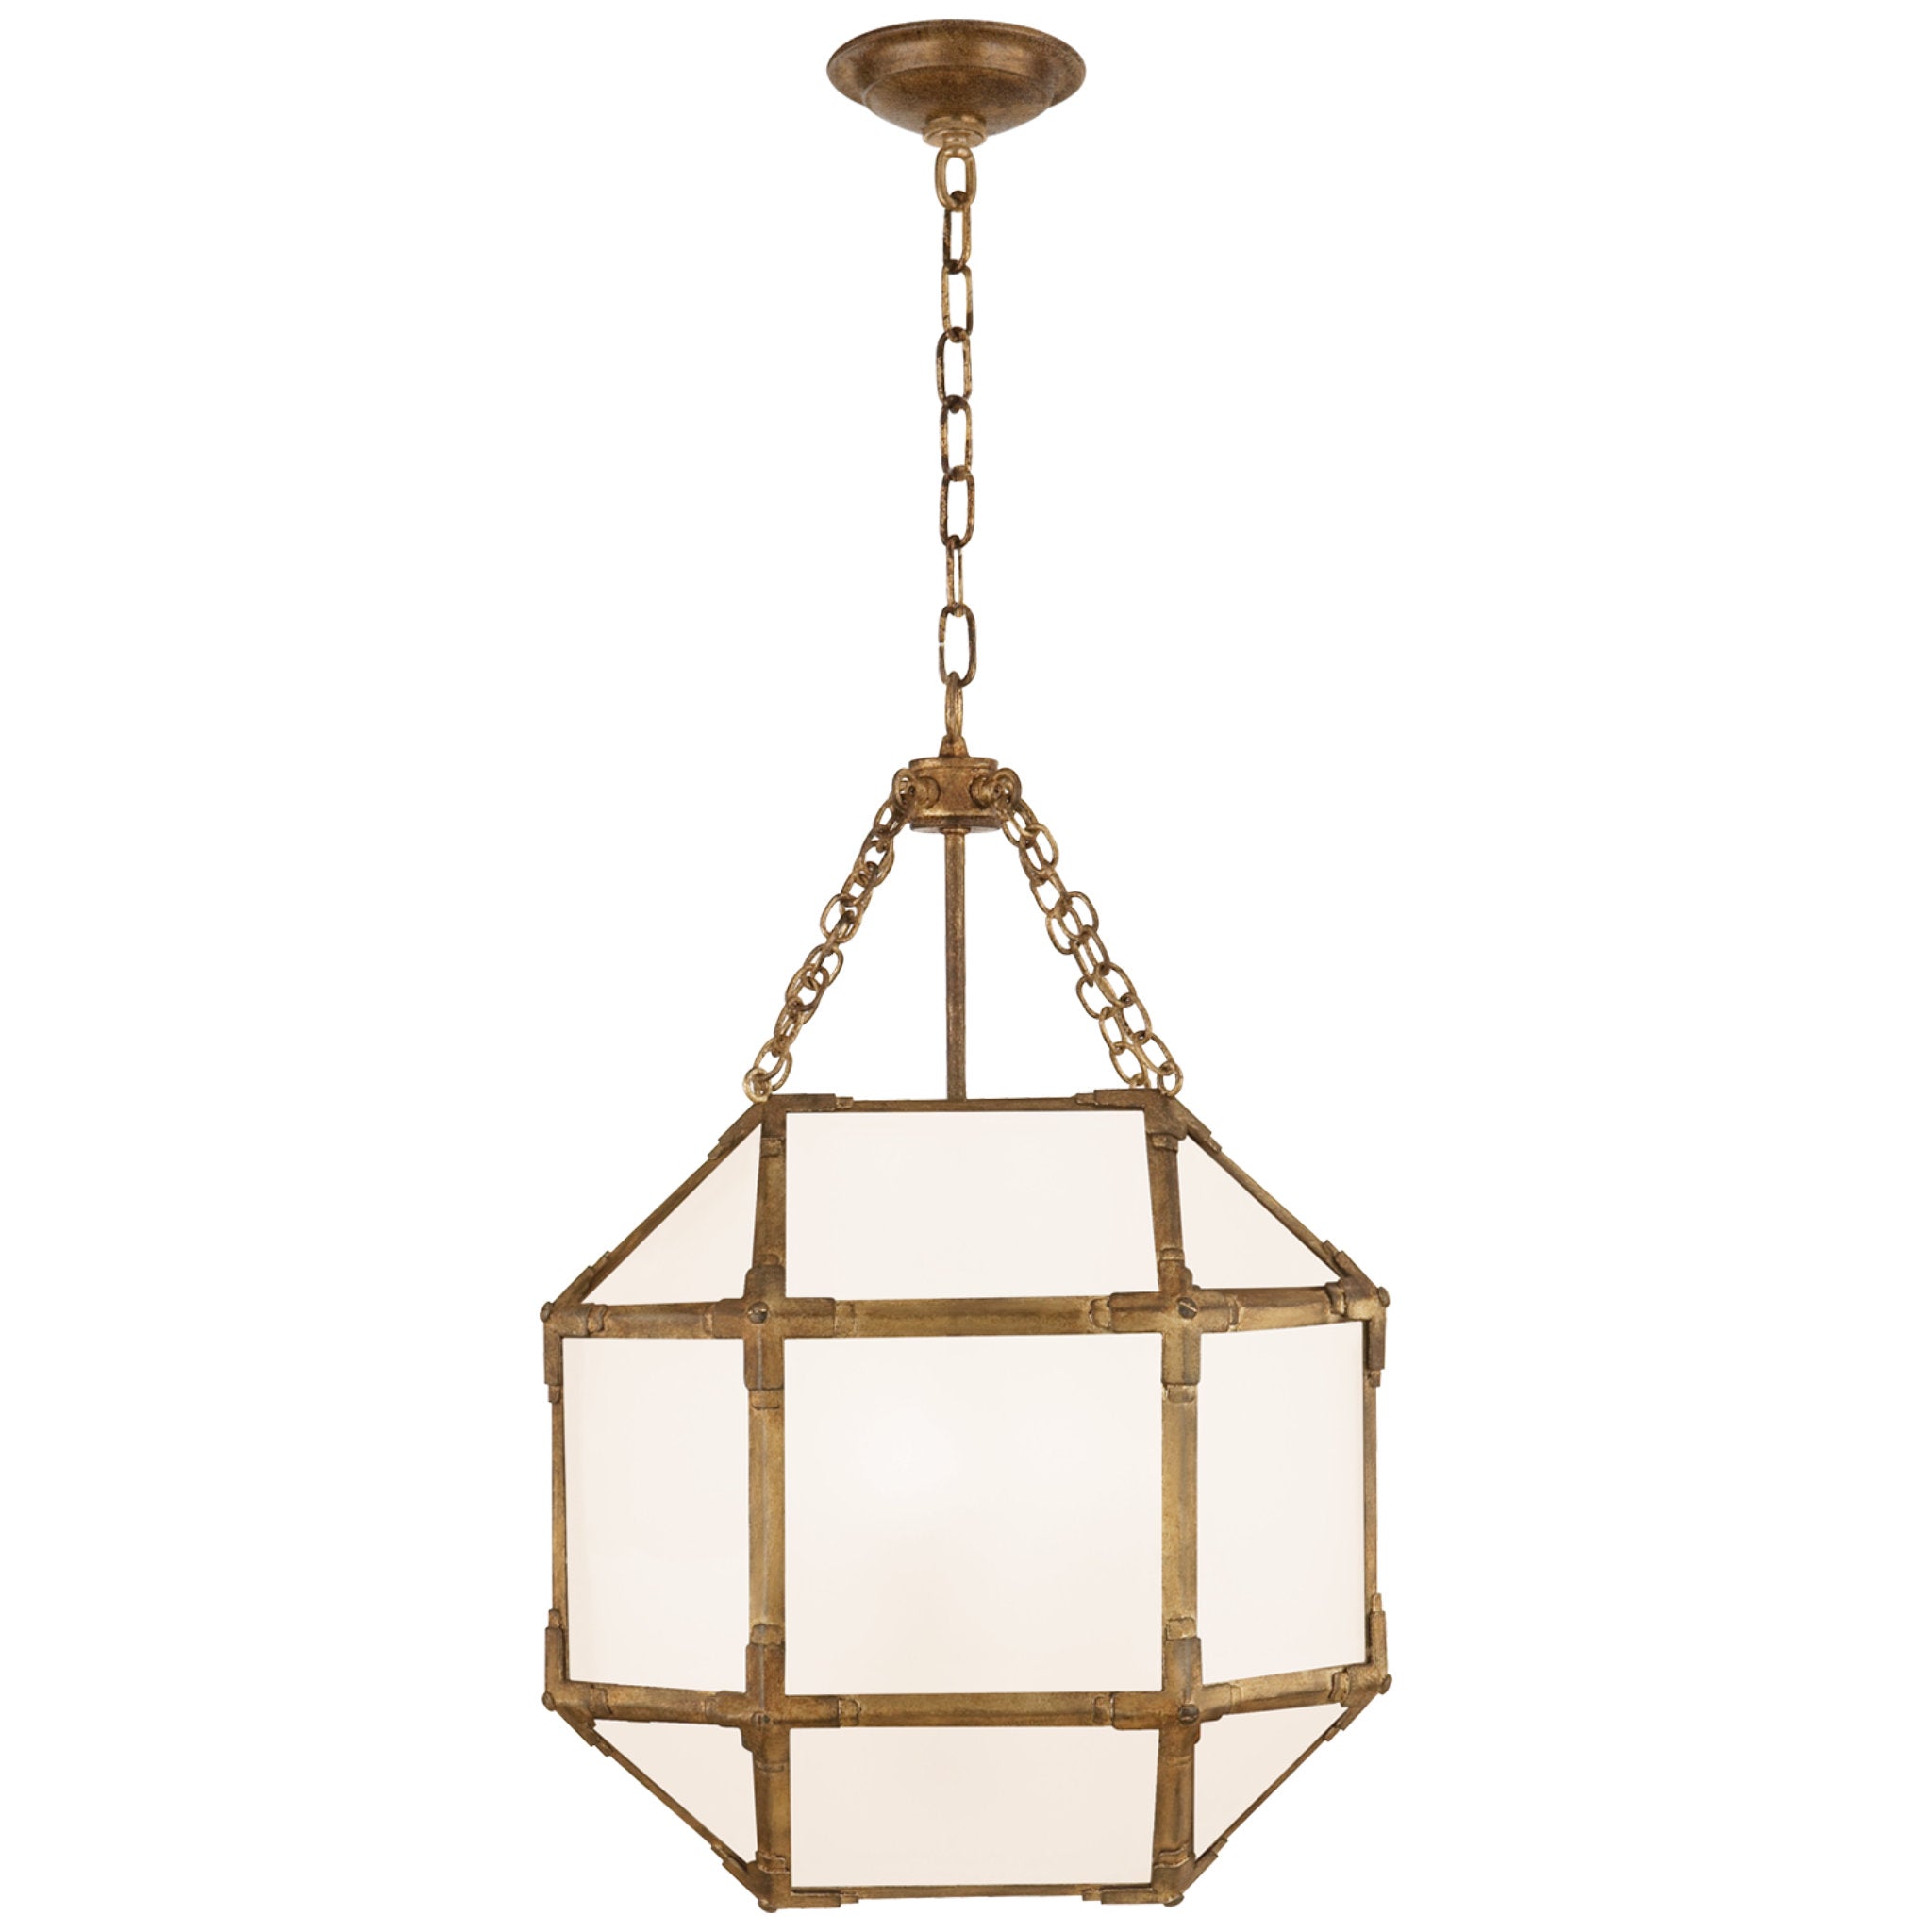 Suzanne Kasler Morris Small Lantern in Gilded Iron with White Glass